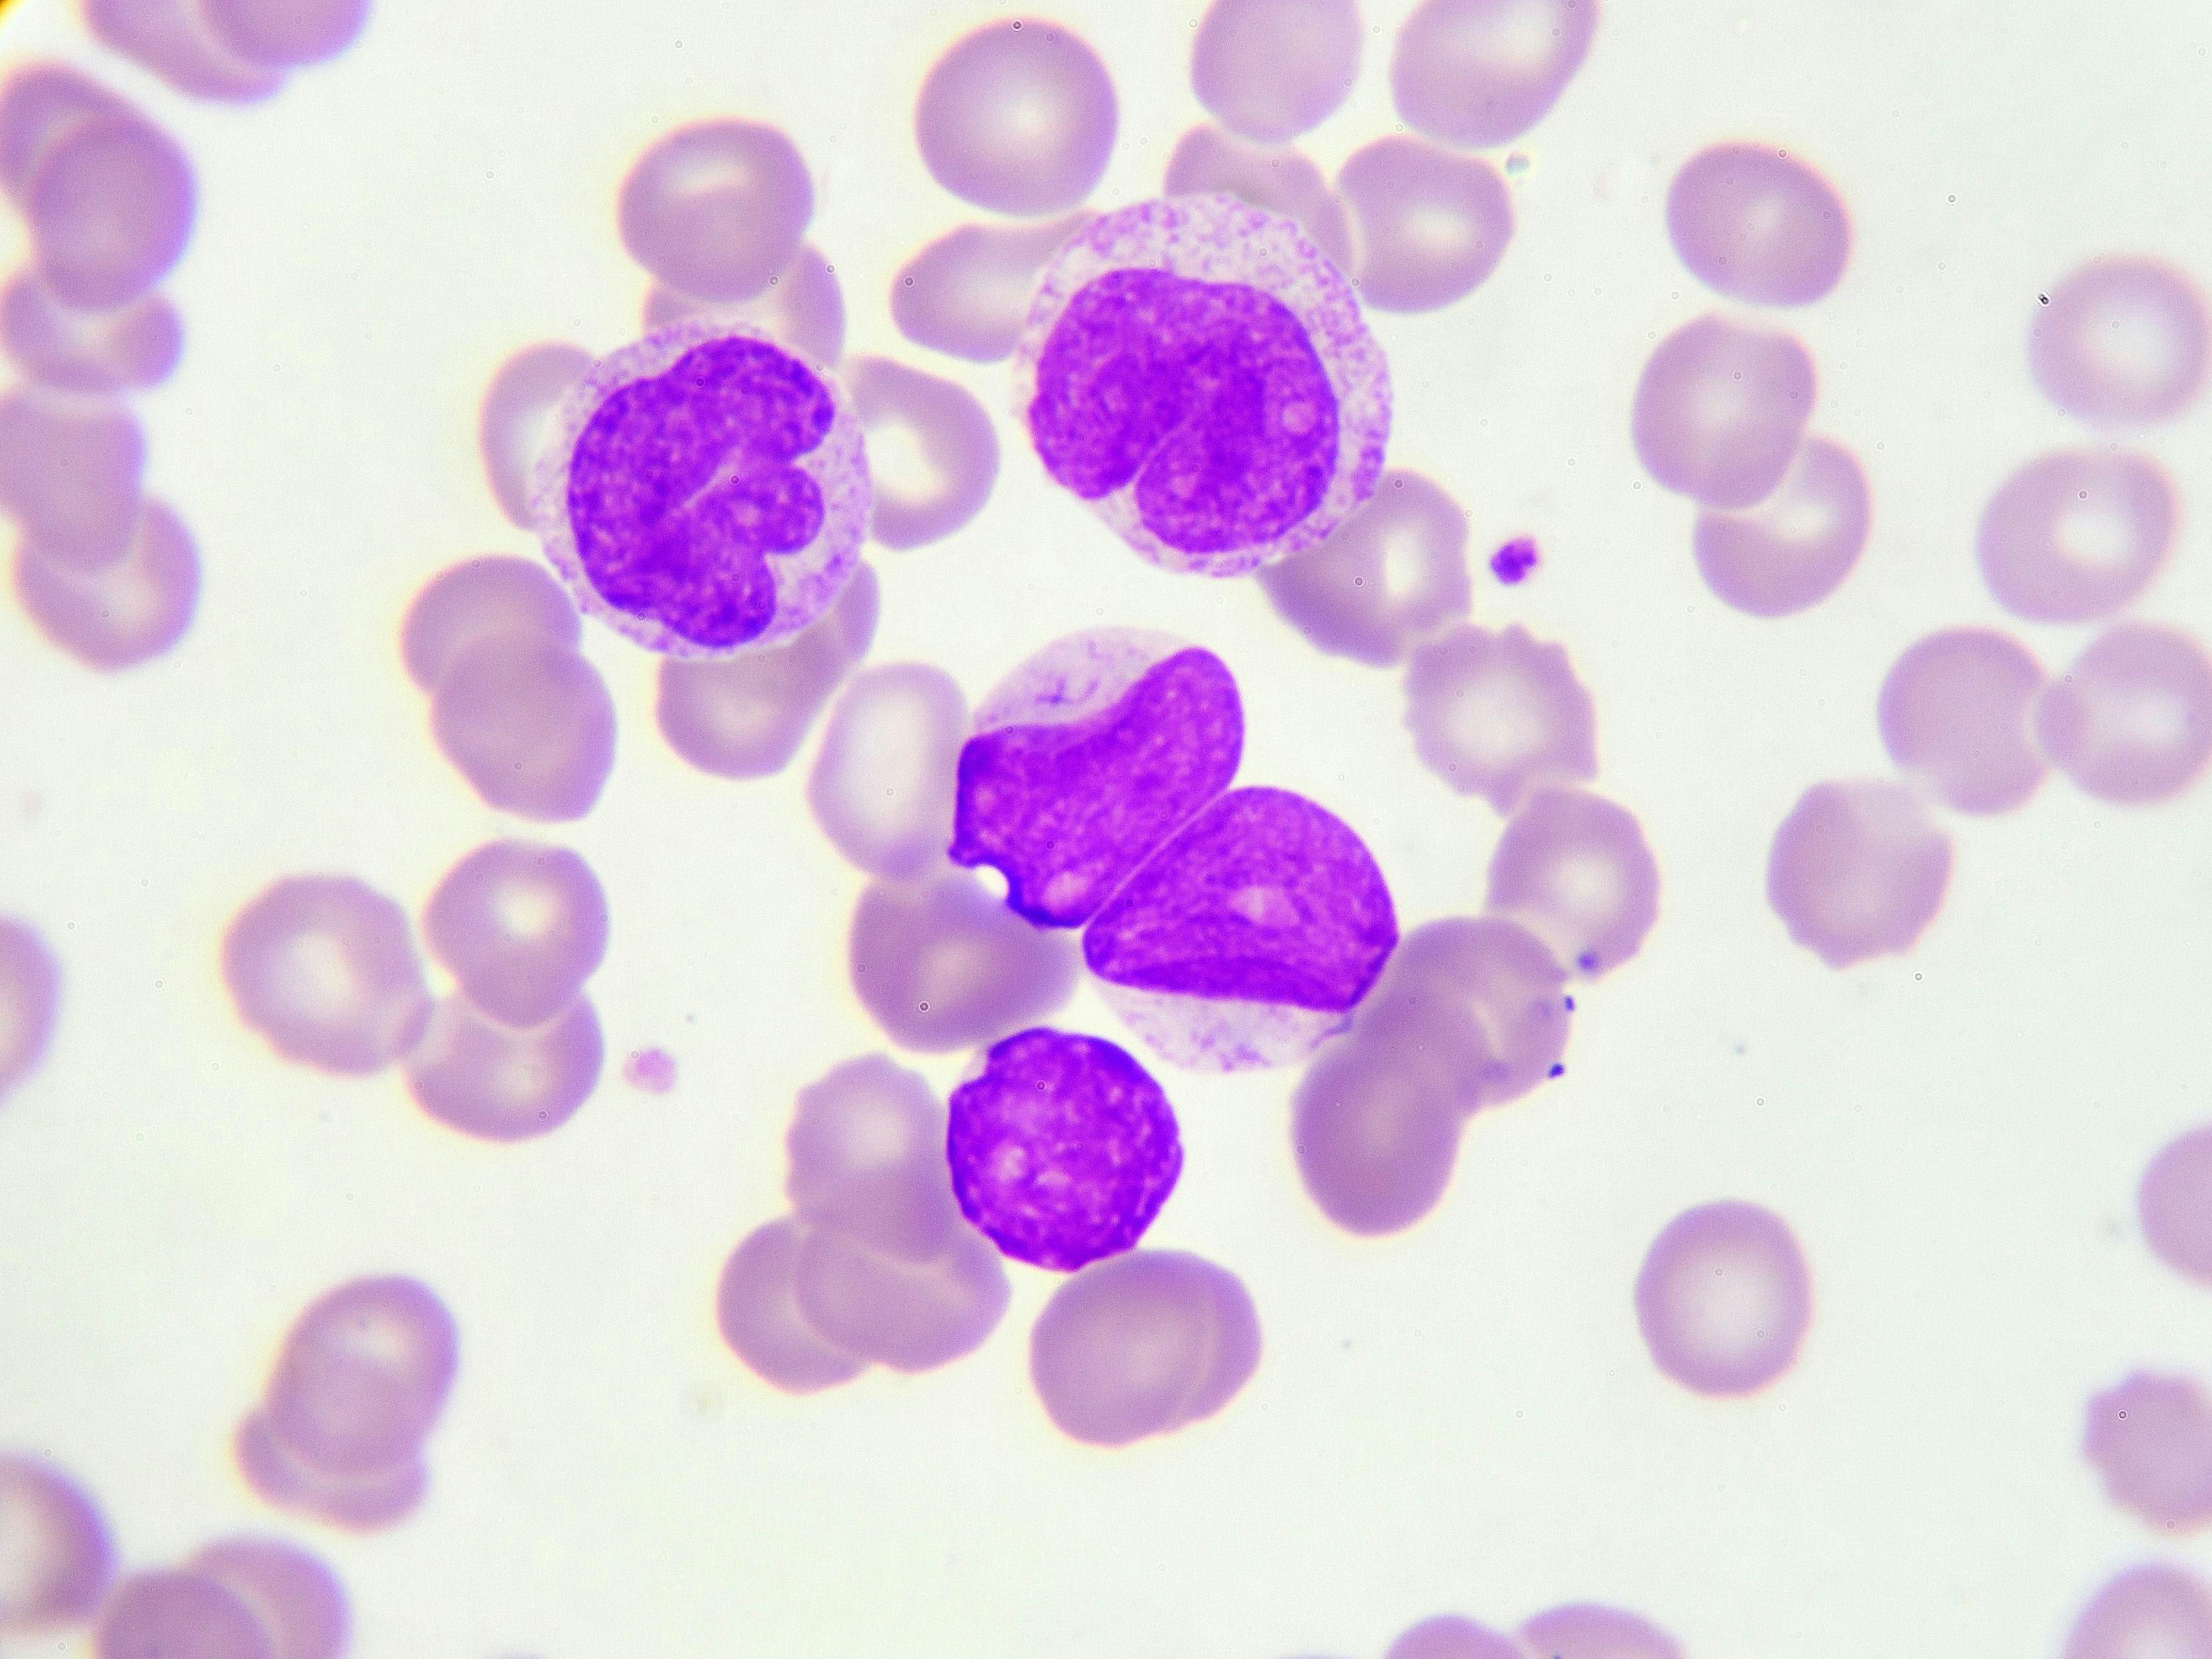 Strong response rates were observed with pirtobrutinib across dose levels to treat patients with chronic lymphocytic leukemia and small lymphocytic lymphoma ion a phase 1/2 study.